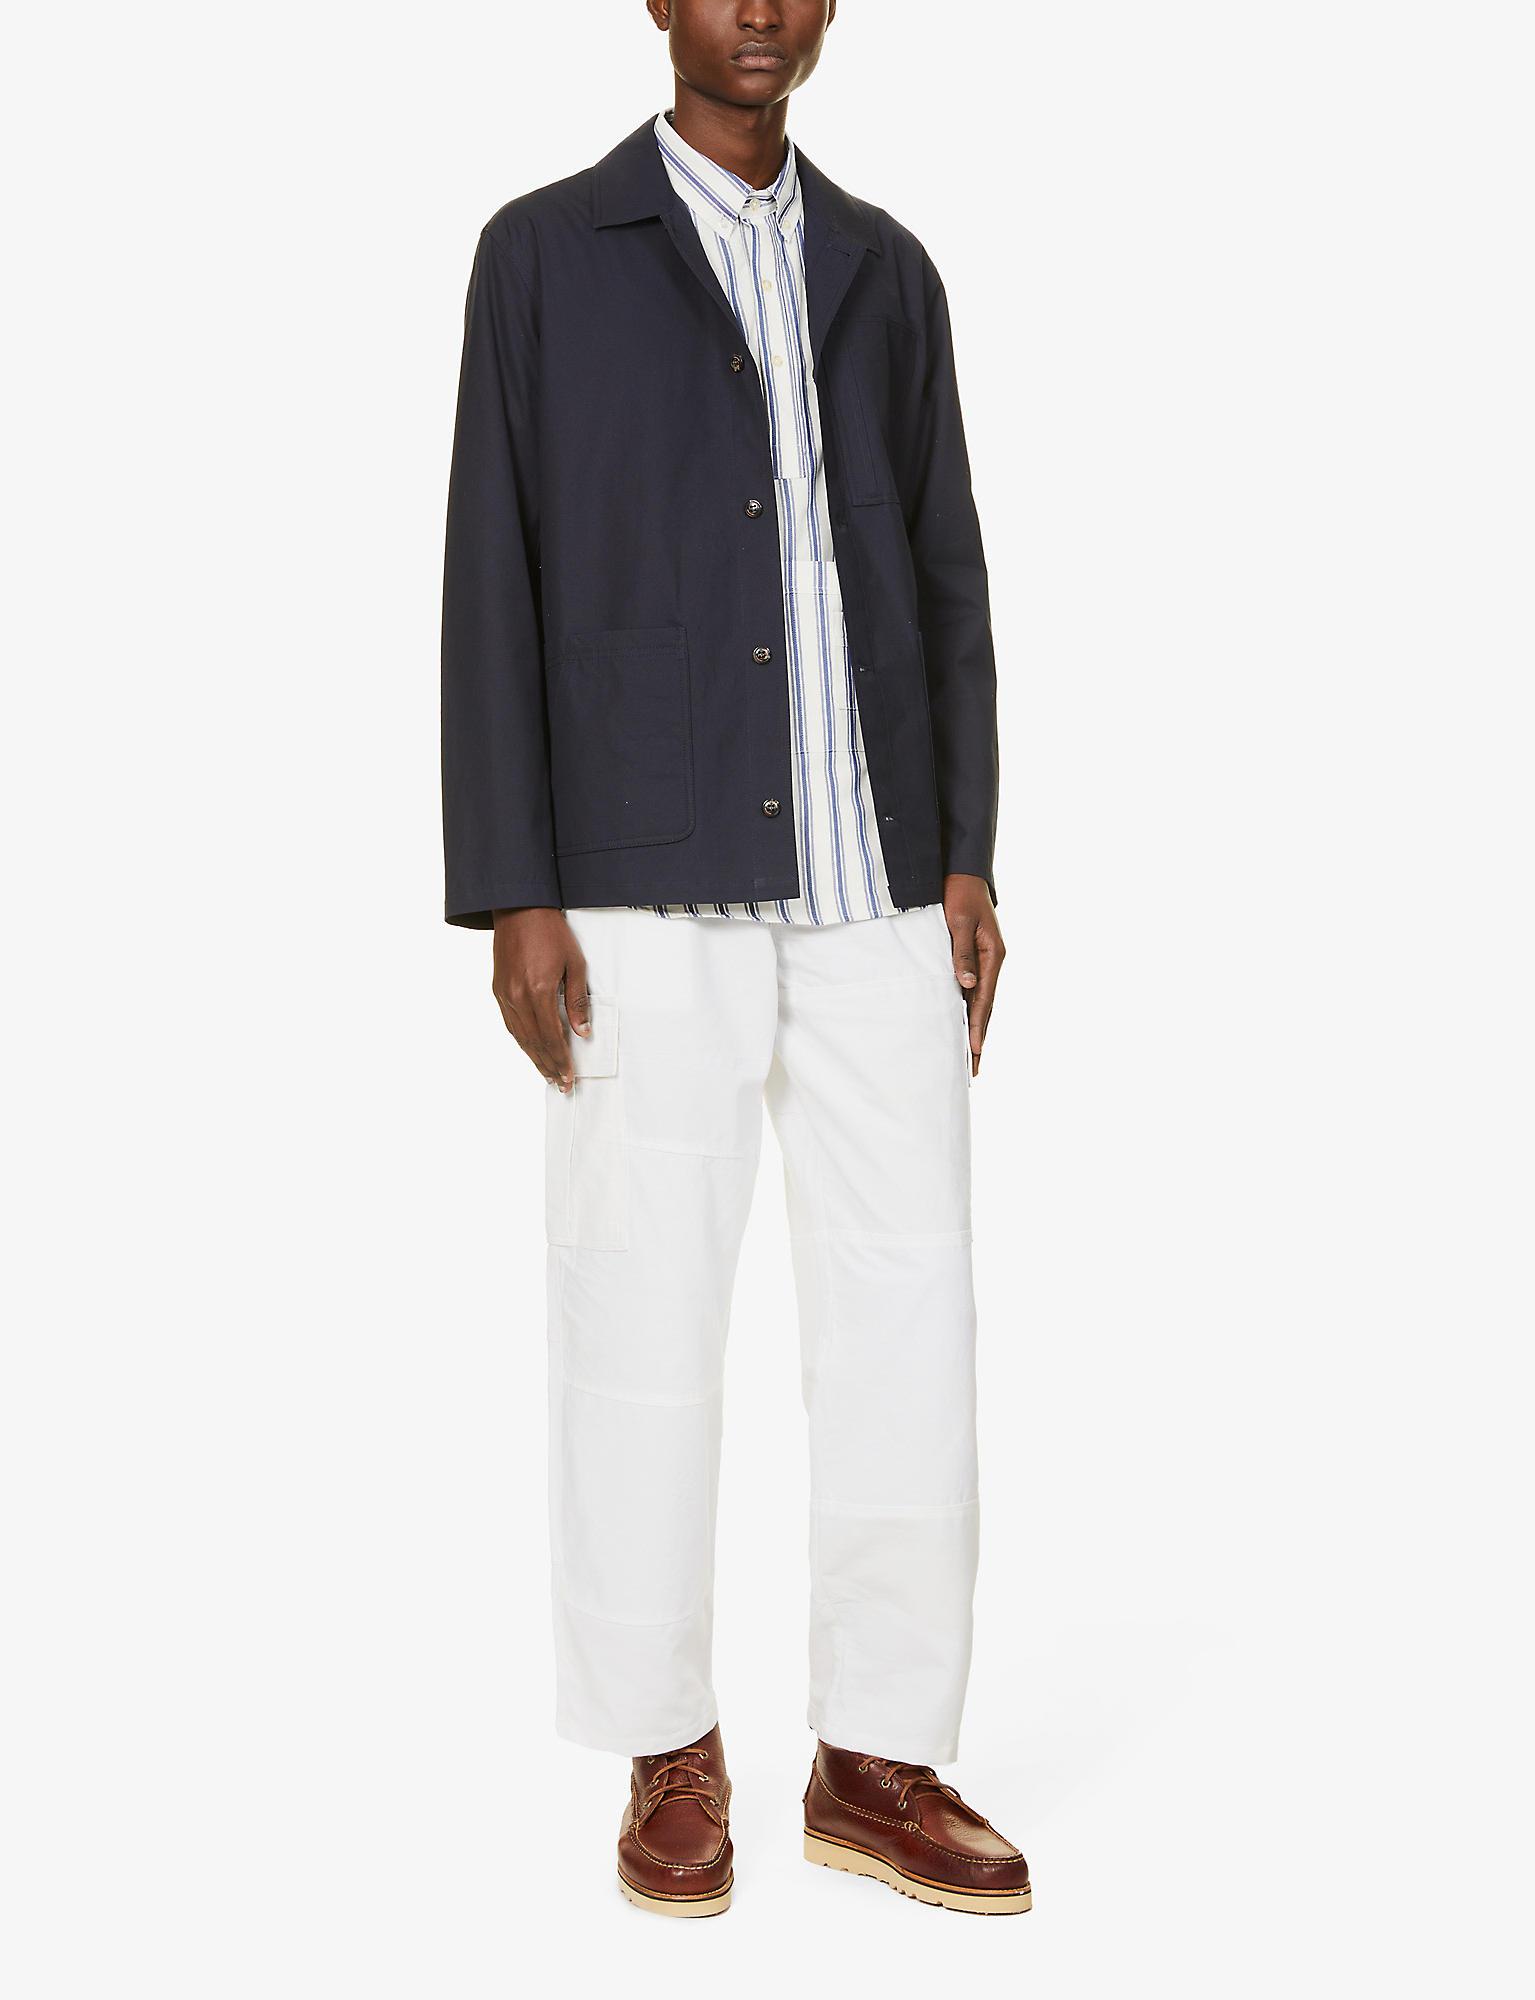 Peregrine Dawson Collared Oversized Cotton Jacket in Blue for Men | Lyst